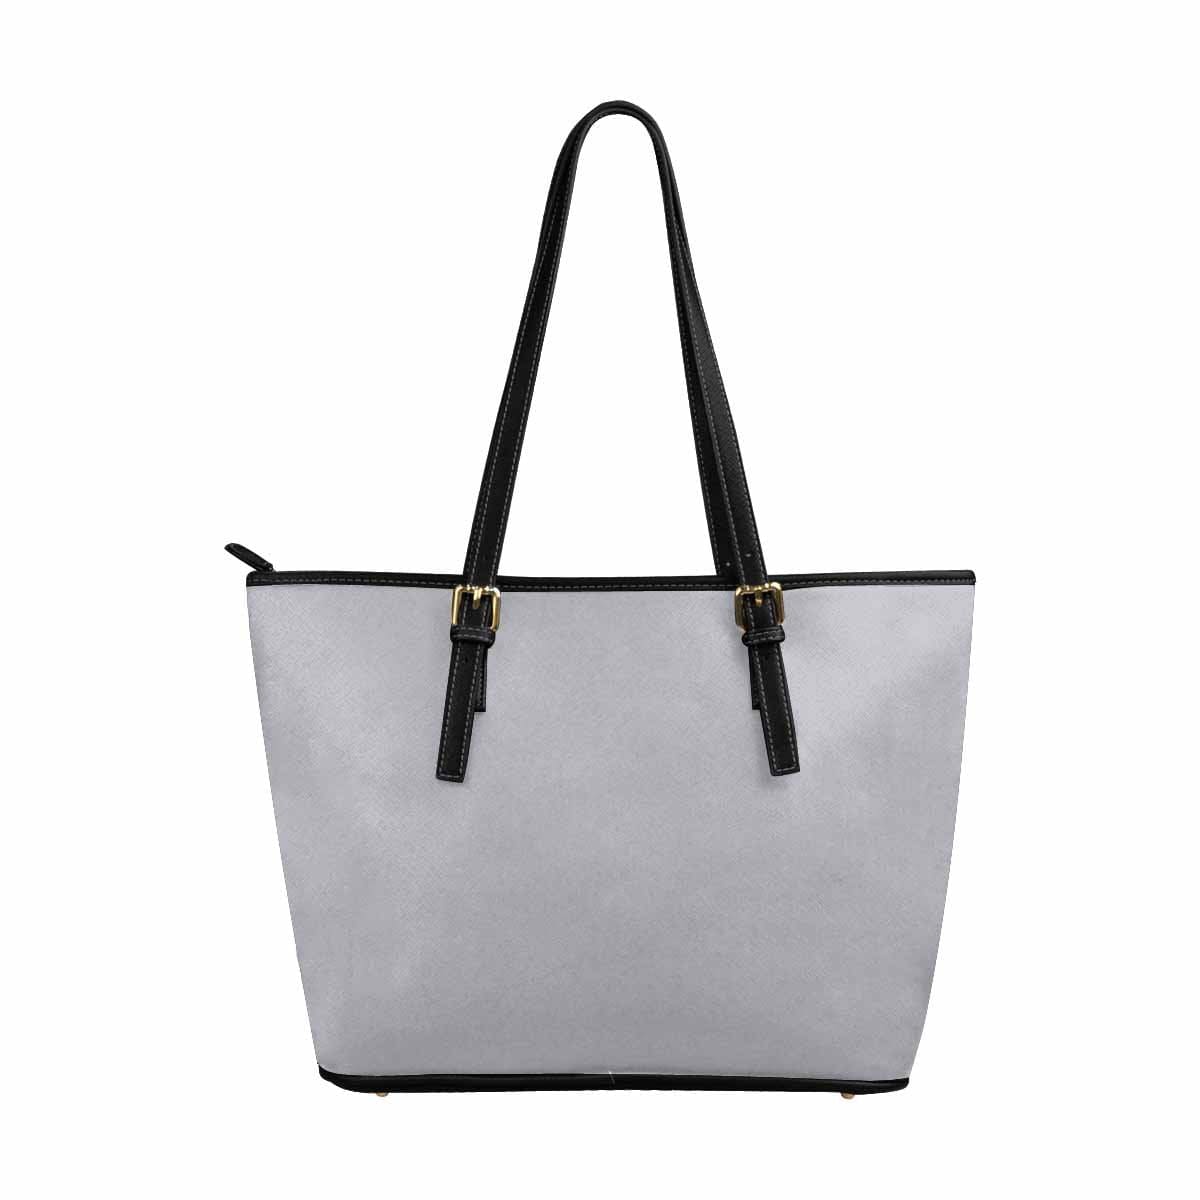 Large Leather Tote Shoulder Bag - Slate Gray - Bags | Leather Tote Bags